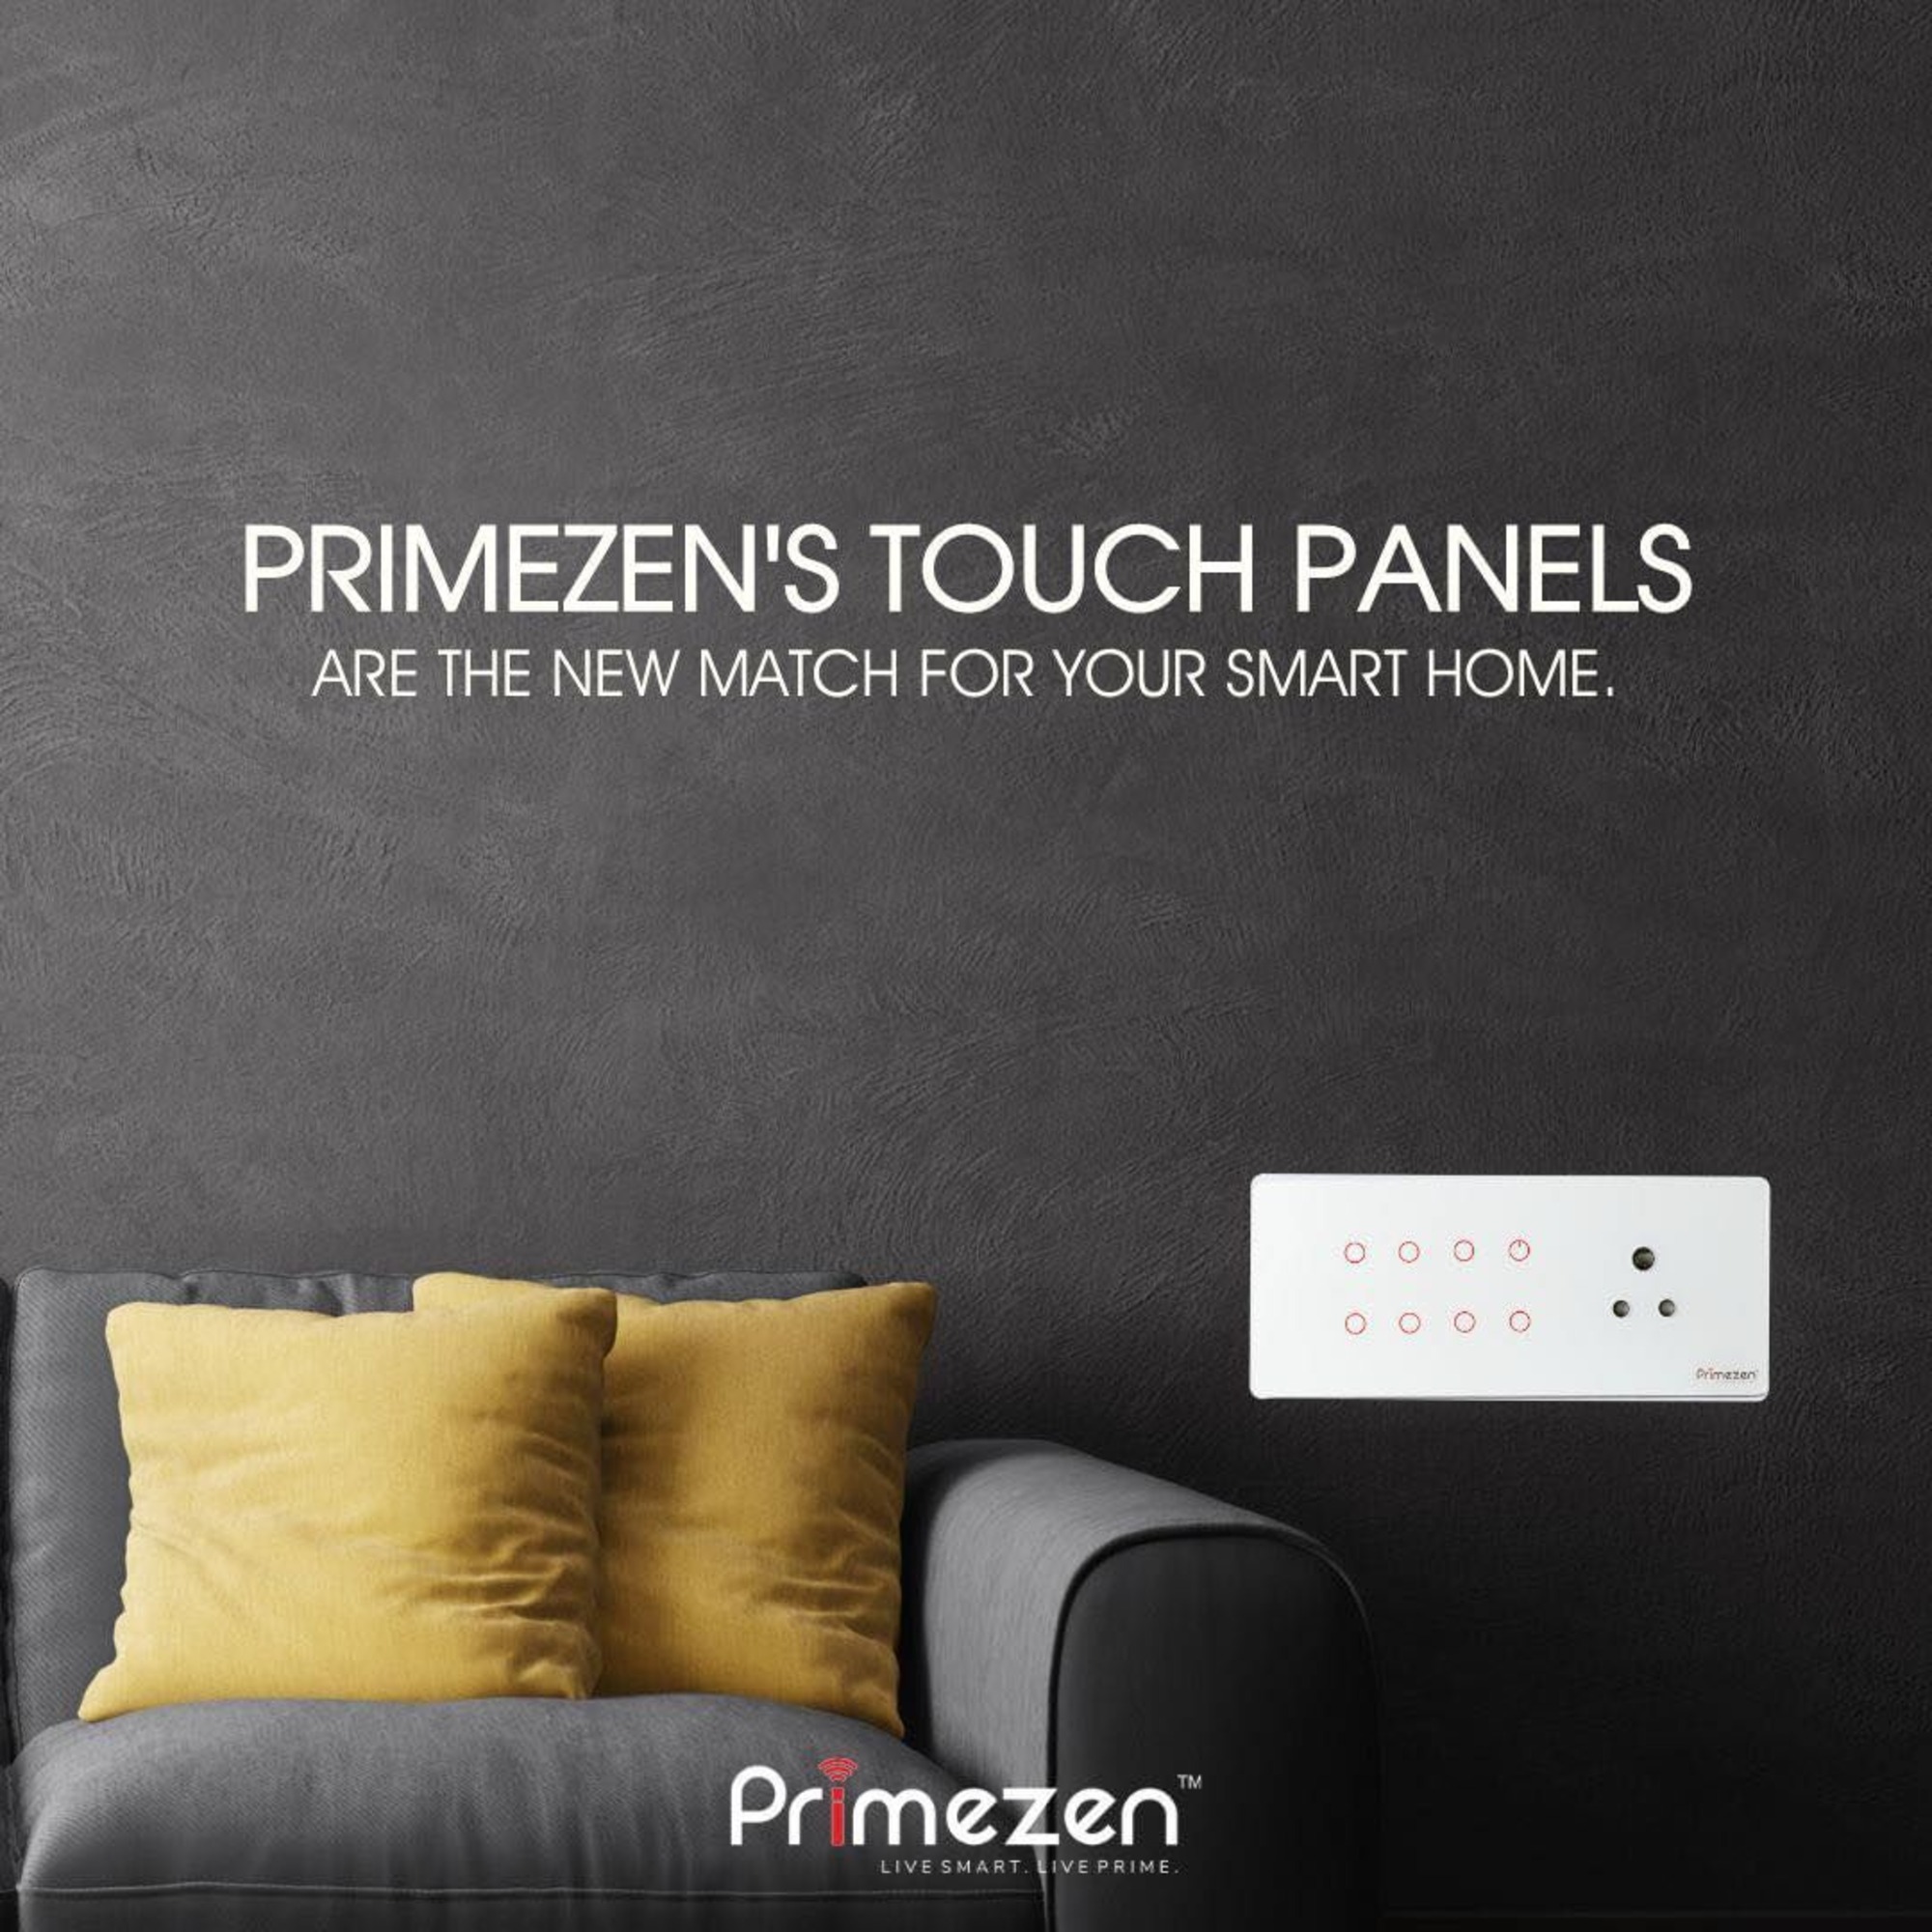  Upgrade Your Home with Primezen Touch Panels Simplify Home Automation and Controls!